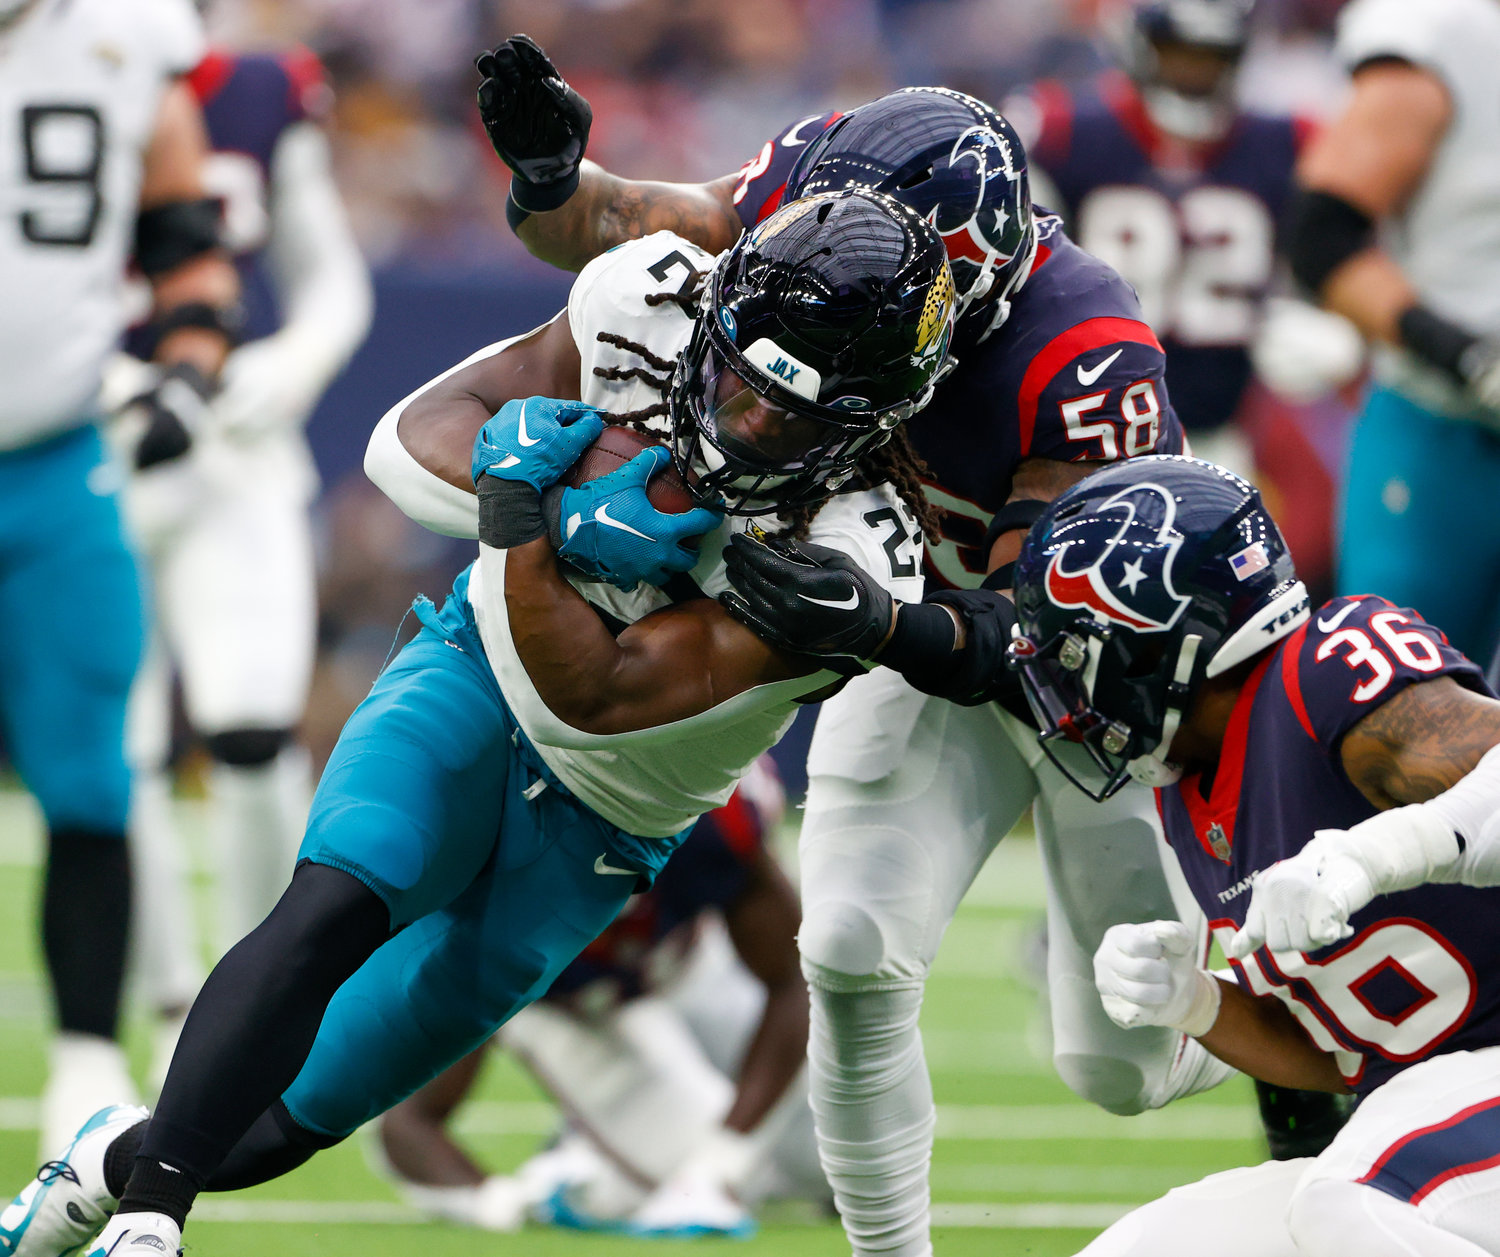 Jaguars running back JaMycal Hasty (22) is tackled by Texans safety Jonathan Owens (36) and linebacker Christian Kirksey (58) during an NFL game between the Houston Texans and the Jacksonville Jaguars on Jan. 1, 2023 in Houston. The Jaguars won, 31-3.